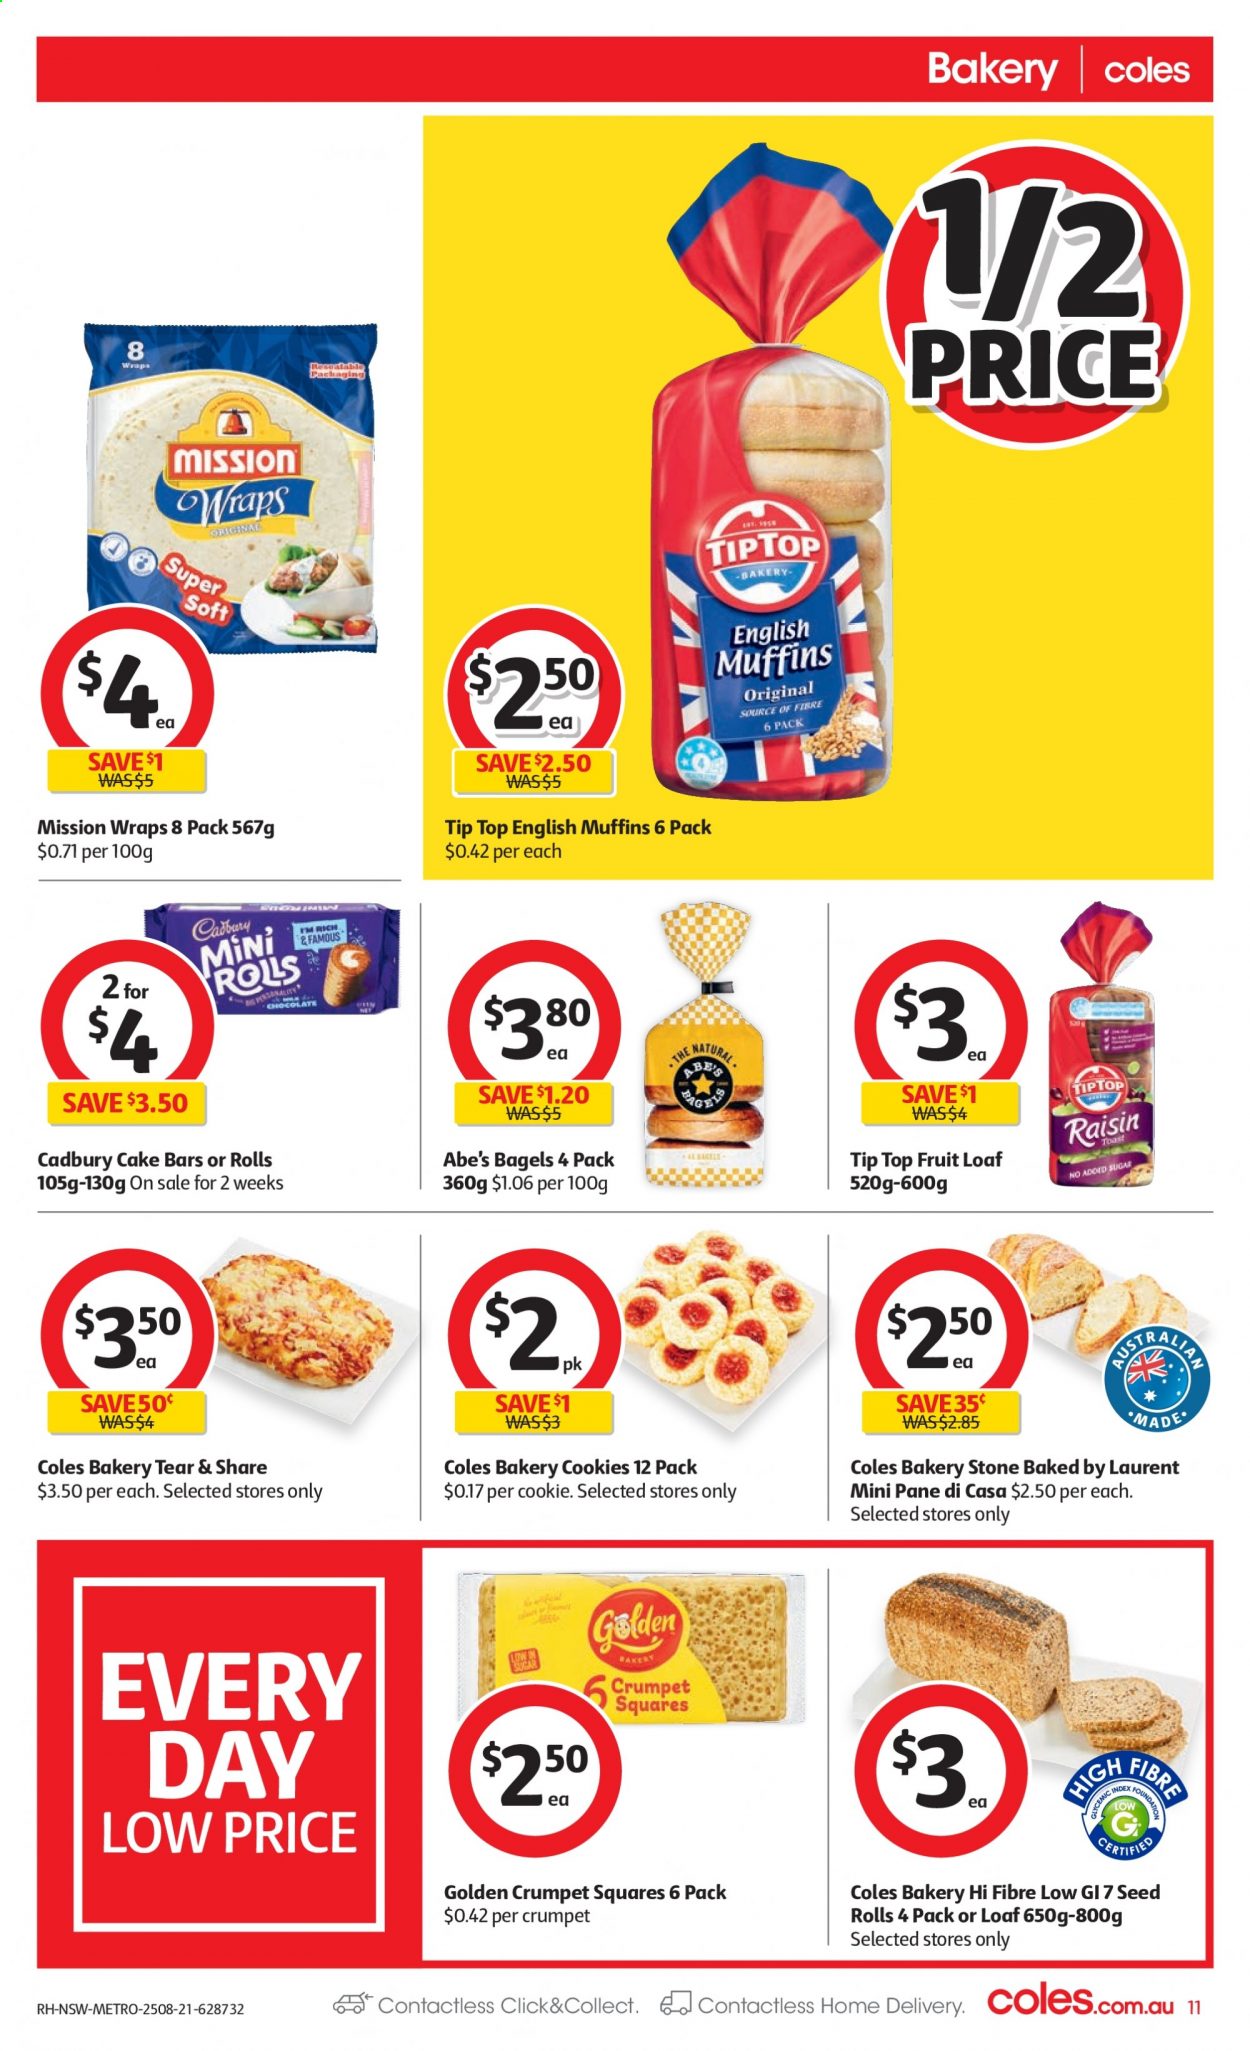 thumbnail - Coles Catalogue - 25 Aug 2021 - 31 Aug 2021 - Sales products - bagels, english muffins, Tip Top, cake, wraps, Golden Crumpet, cookies, crumpet squares, Cadbury, plant seeds. Page 11.